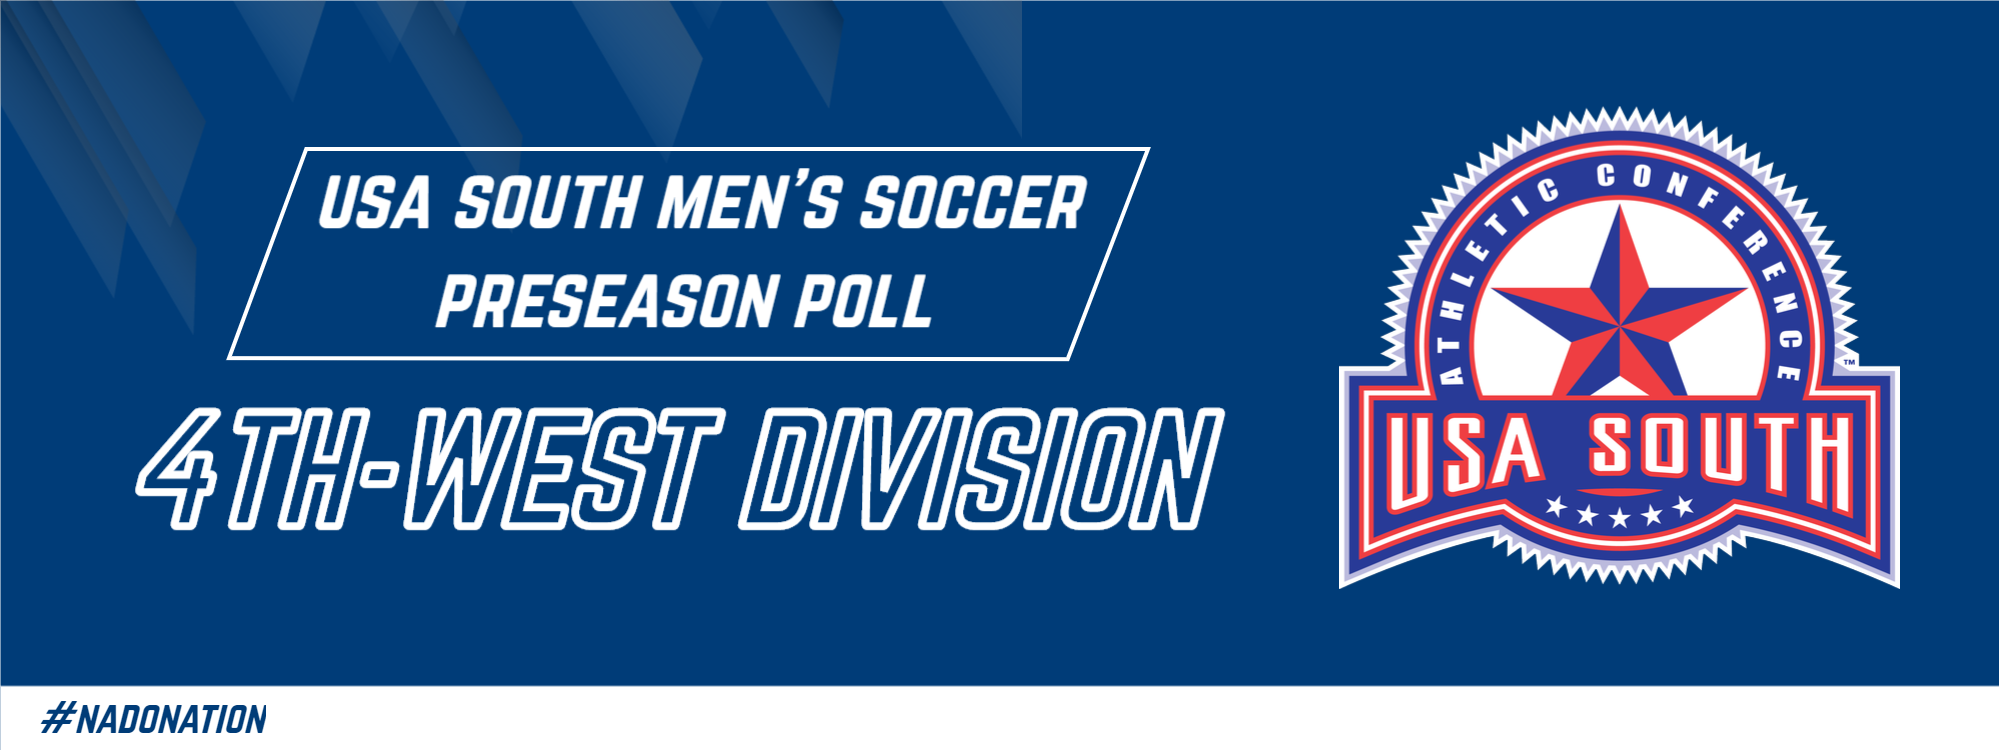 Season Preview: USA South Releases Preseason Polls; BC Men’s Soccer Picked Fourth in West Division